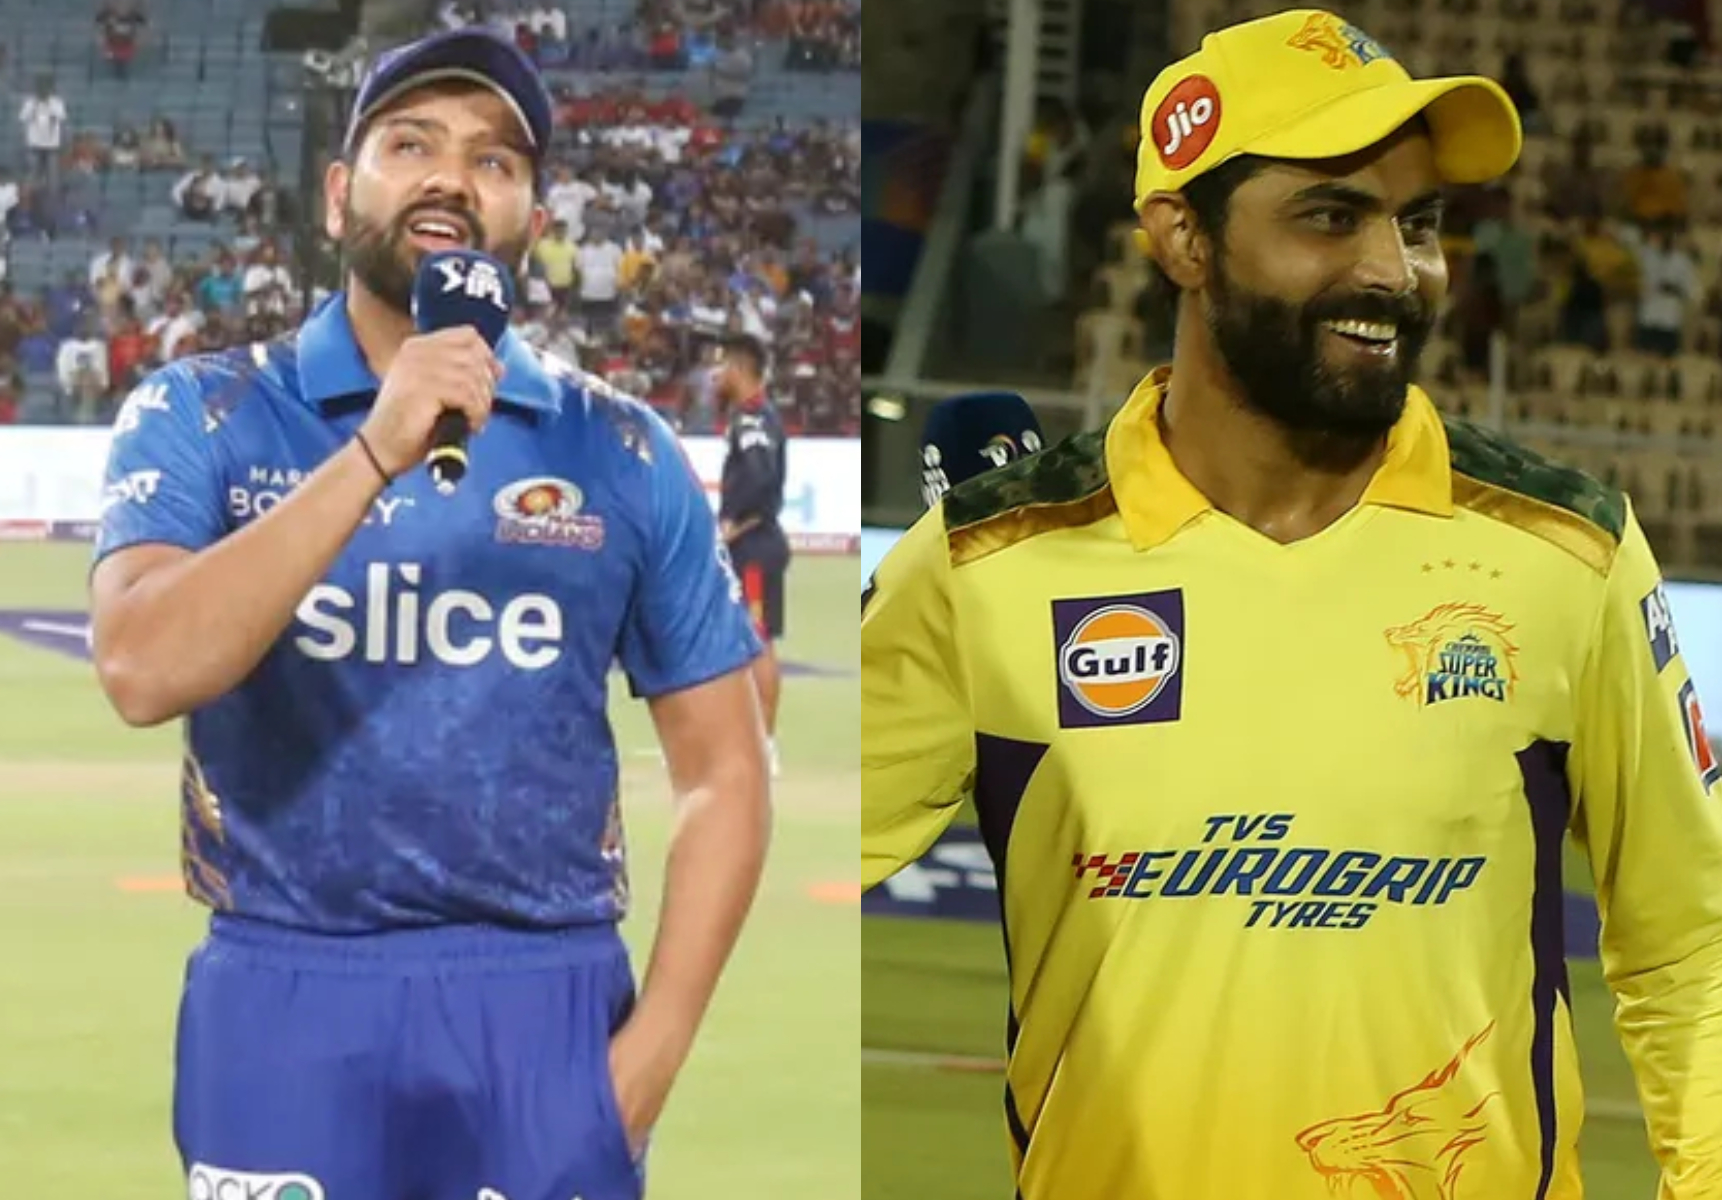 MI is yet to win a match in this tournament, while CSK have won one | BCCI-IPL